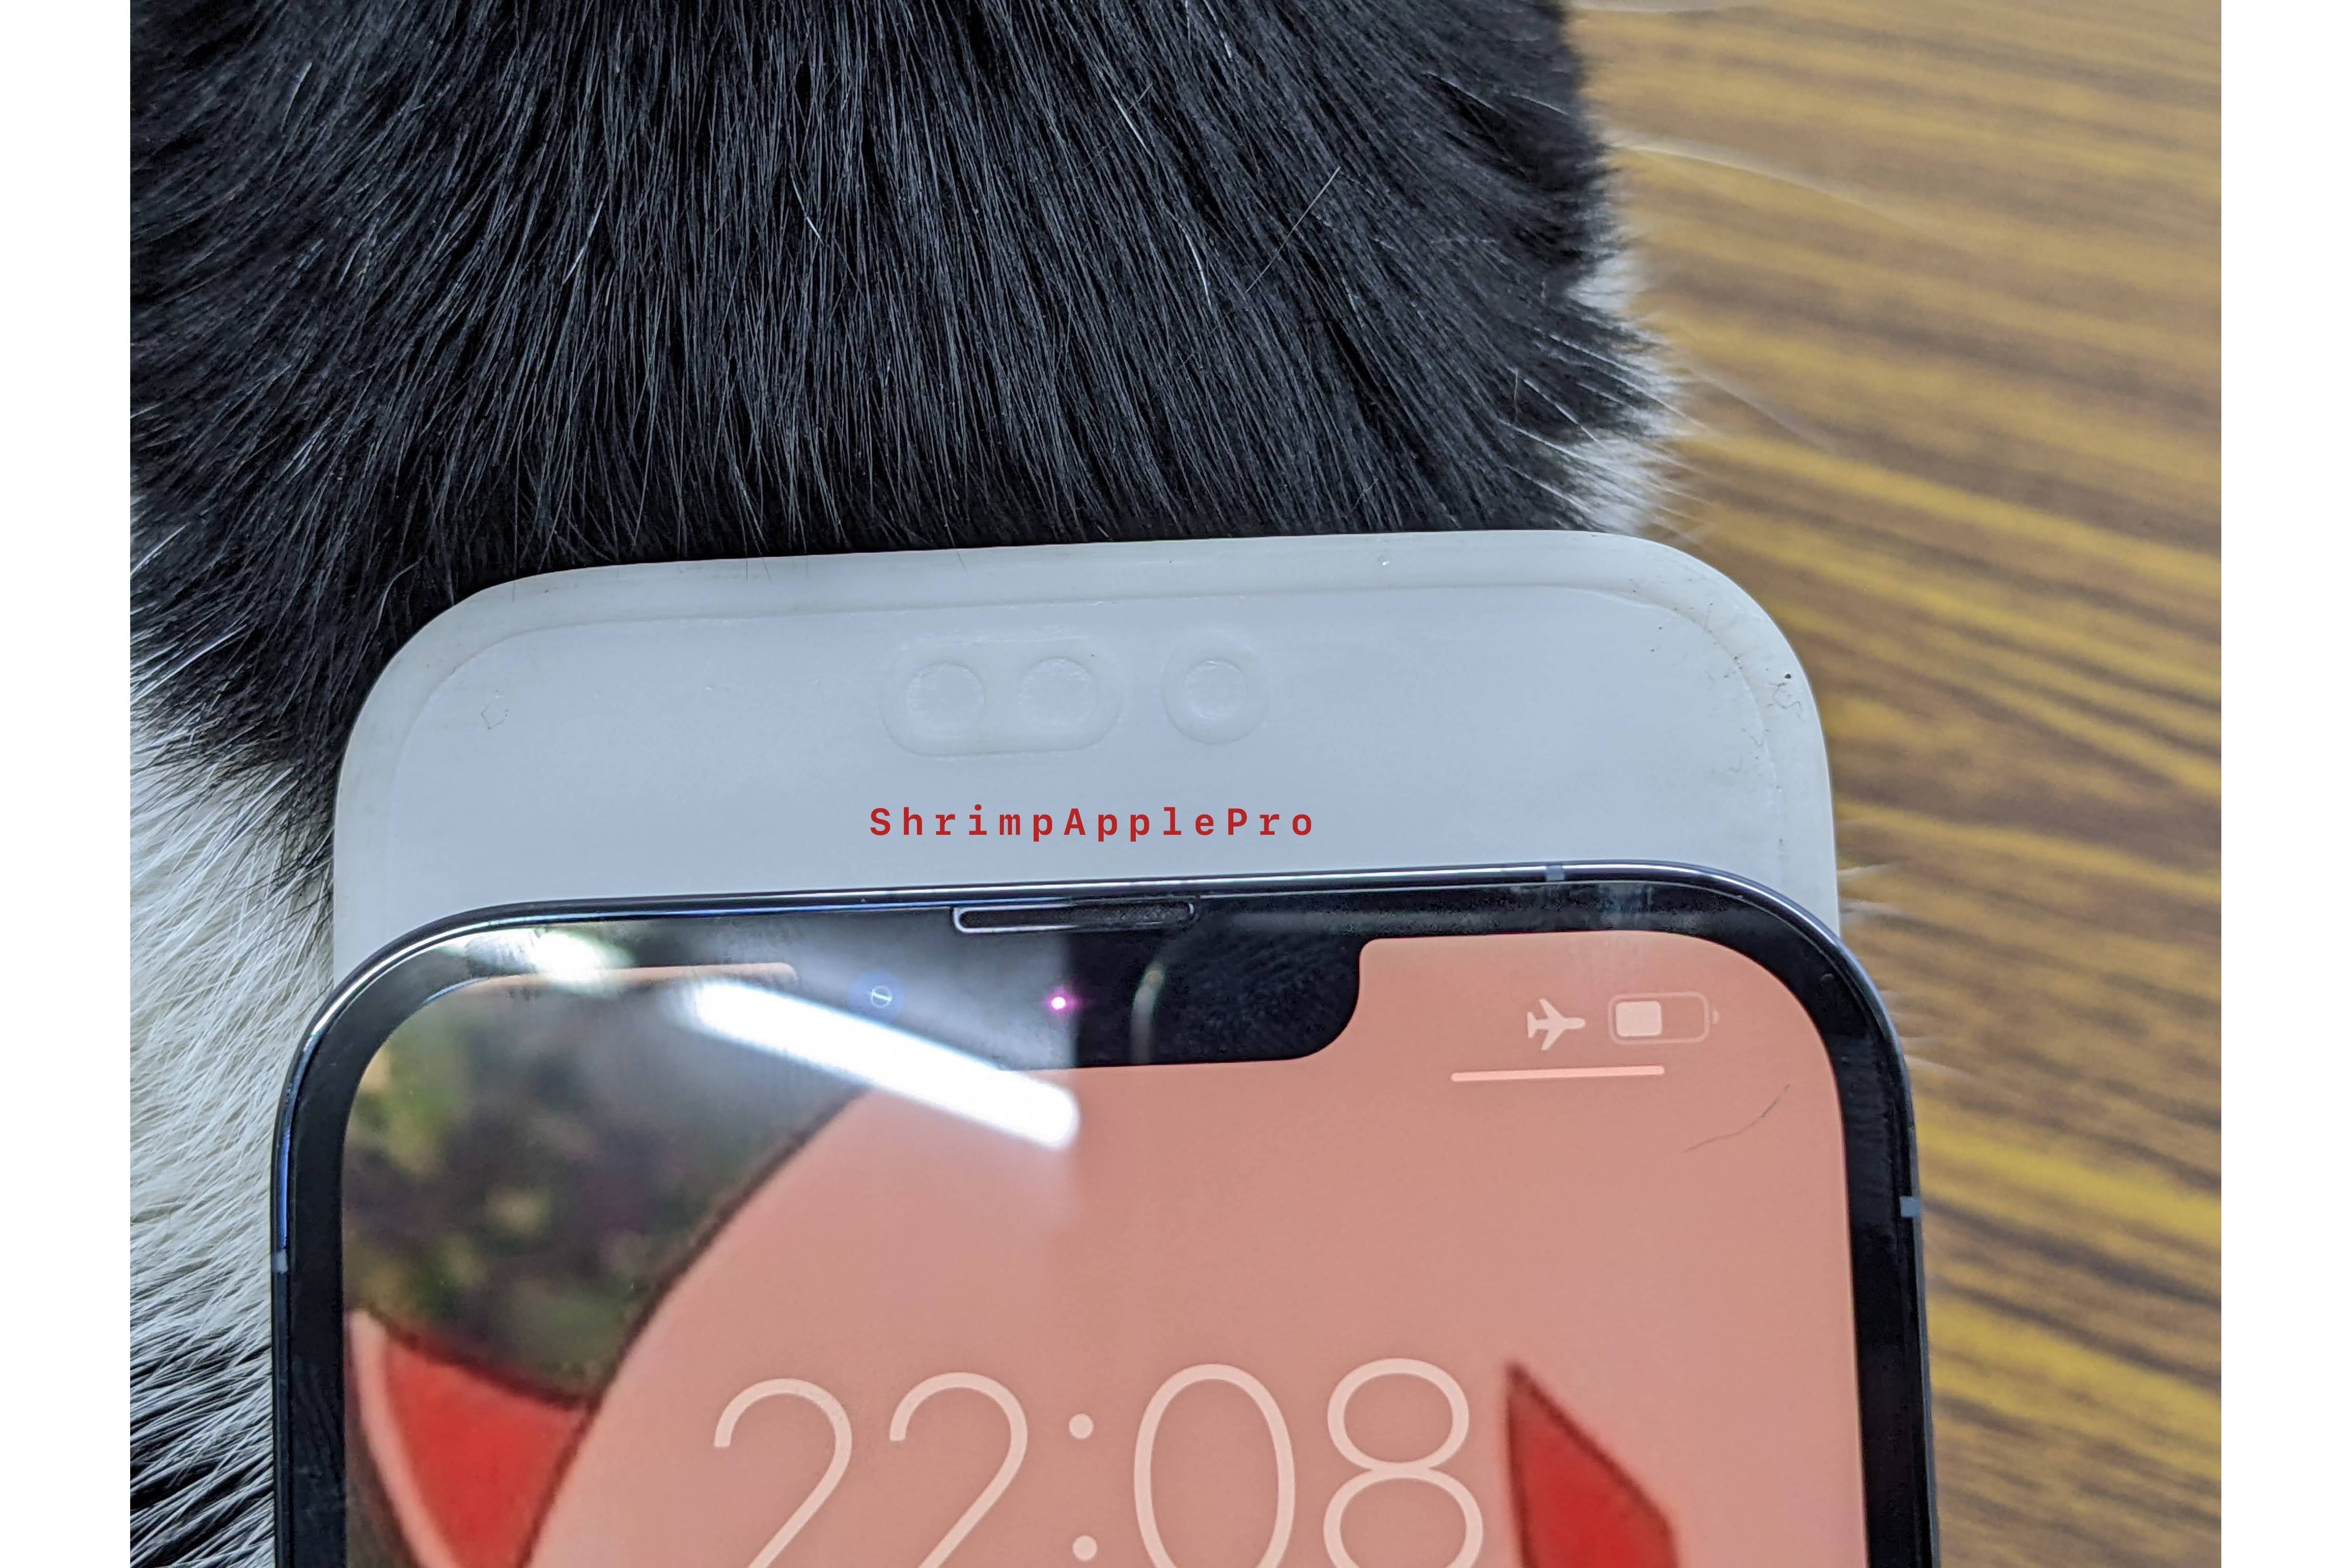 iPhone 14 Pro Max&#039;s cutouts seem to be bigger than most users would like - New dummy unit shows how big the cutouts on iPhone 14 Pro Max could be